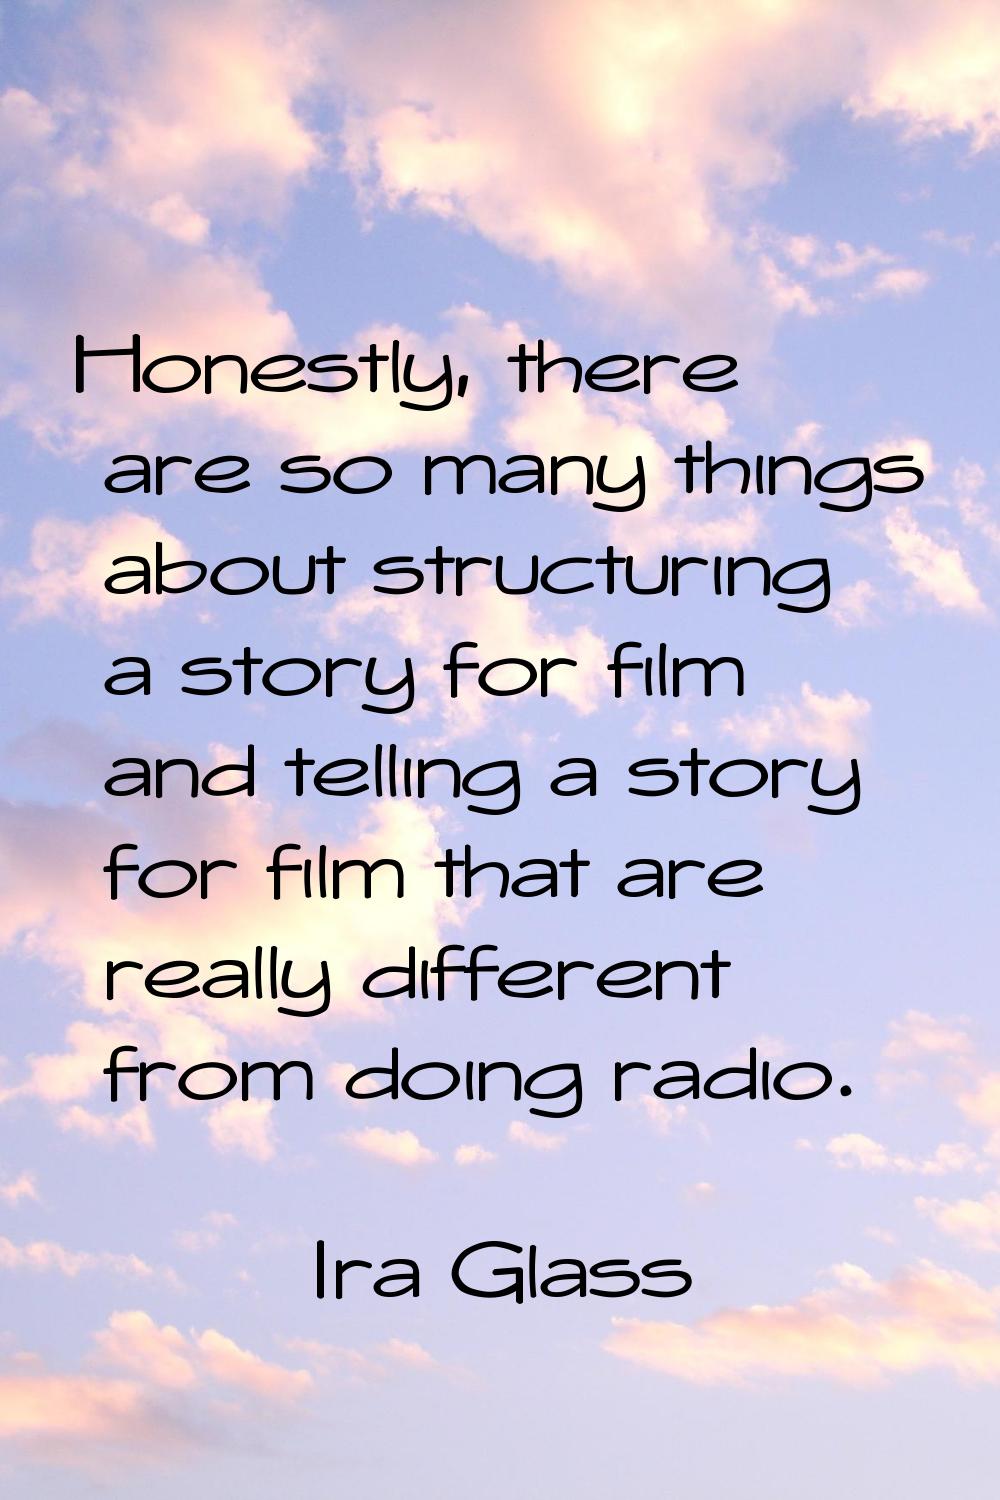 Honestly, there are so many things about structuring a story for film and telling a story for film 